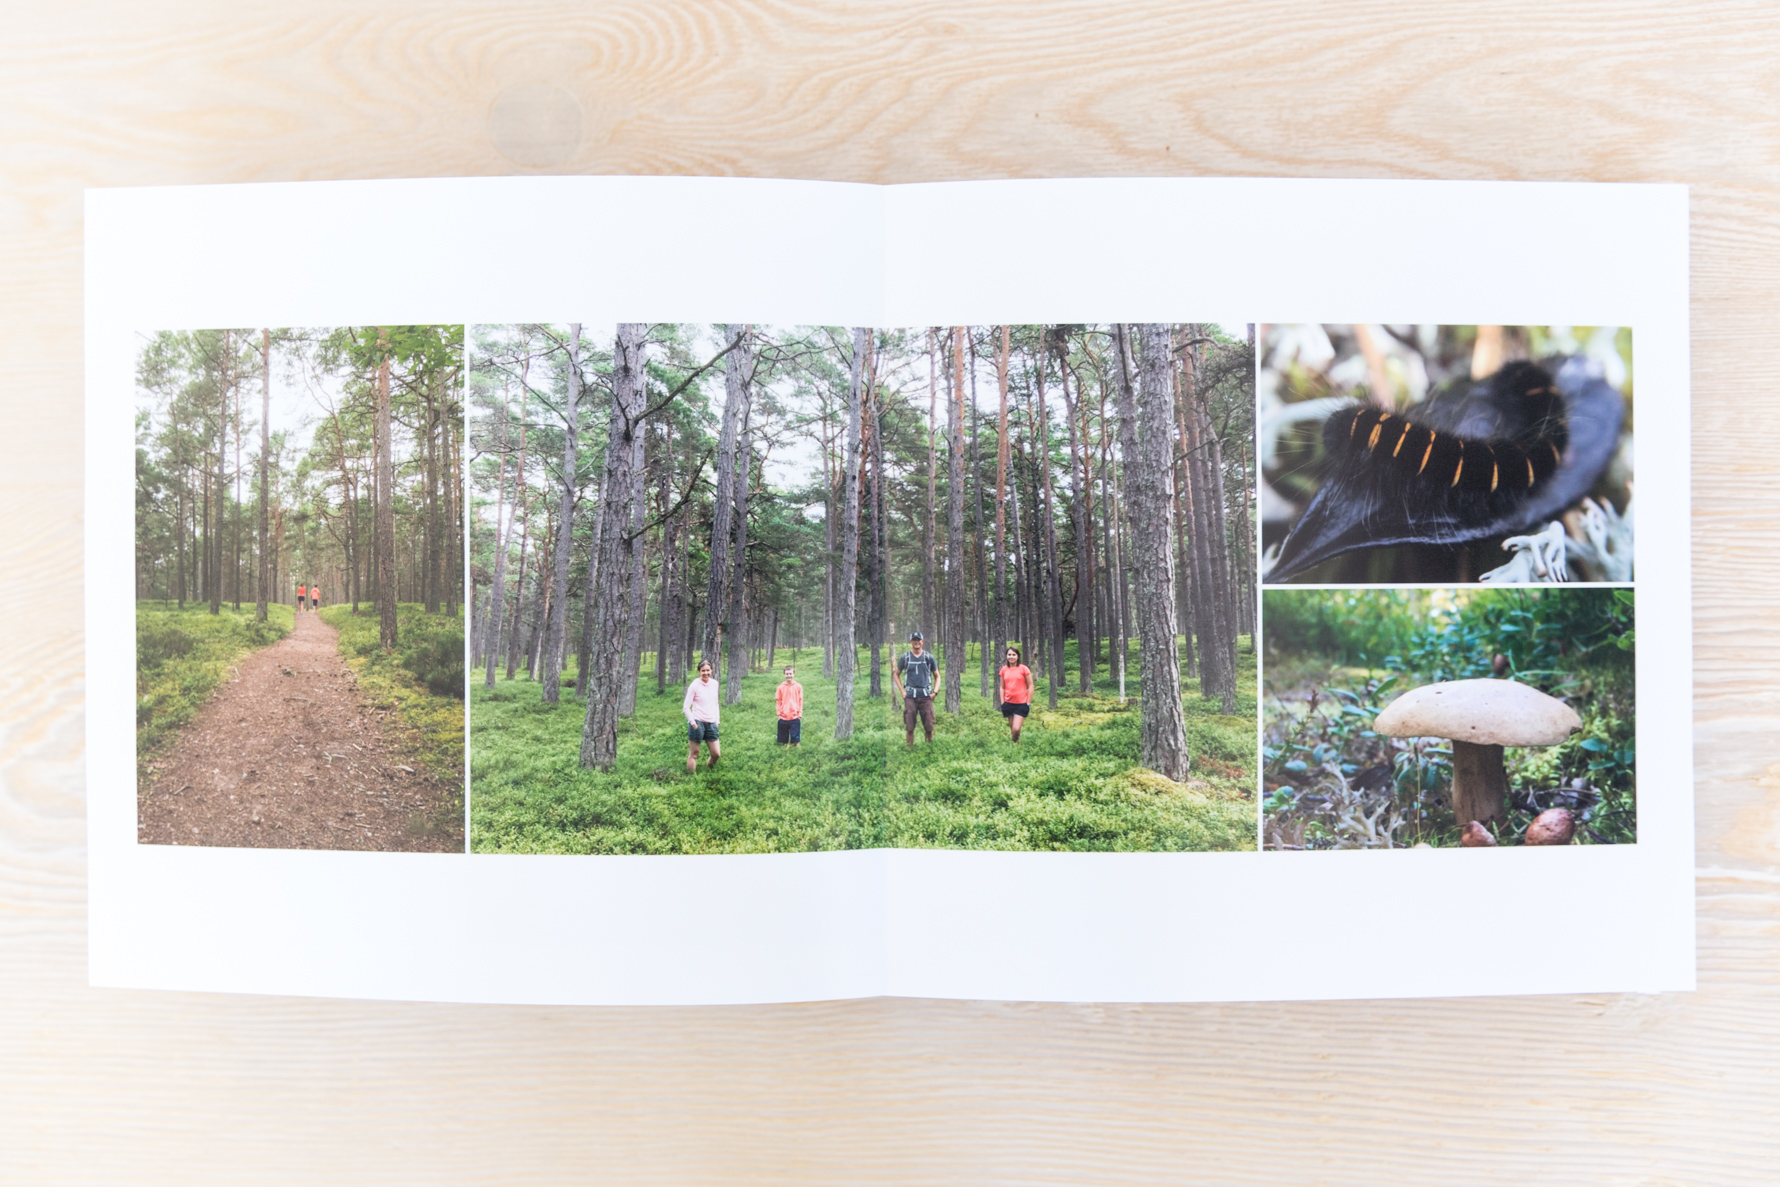 On Documenting Your Travels | A Blog Post by Suzanne O'Brien | Sweden & Norway Vacation Photo Book | www.suzanneobrienstudio.com